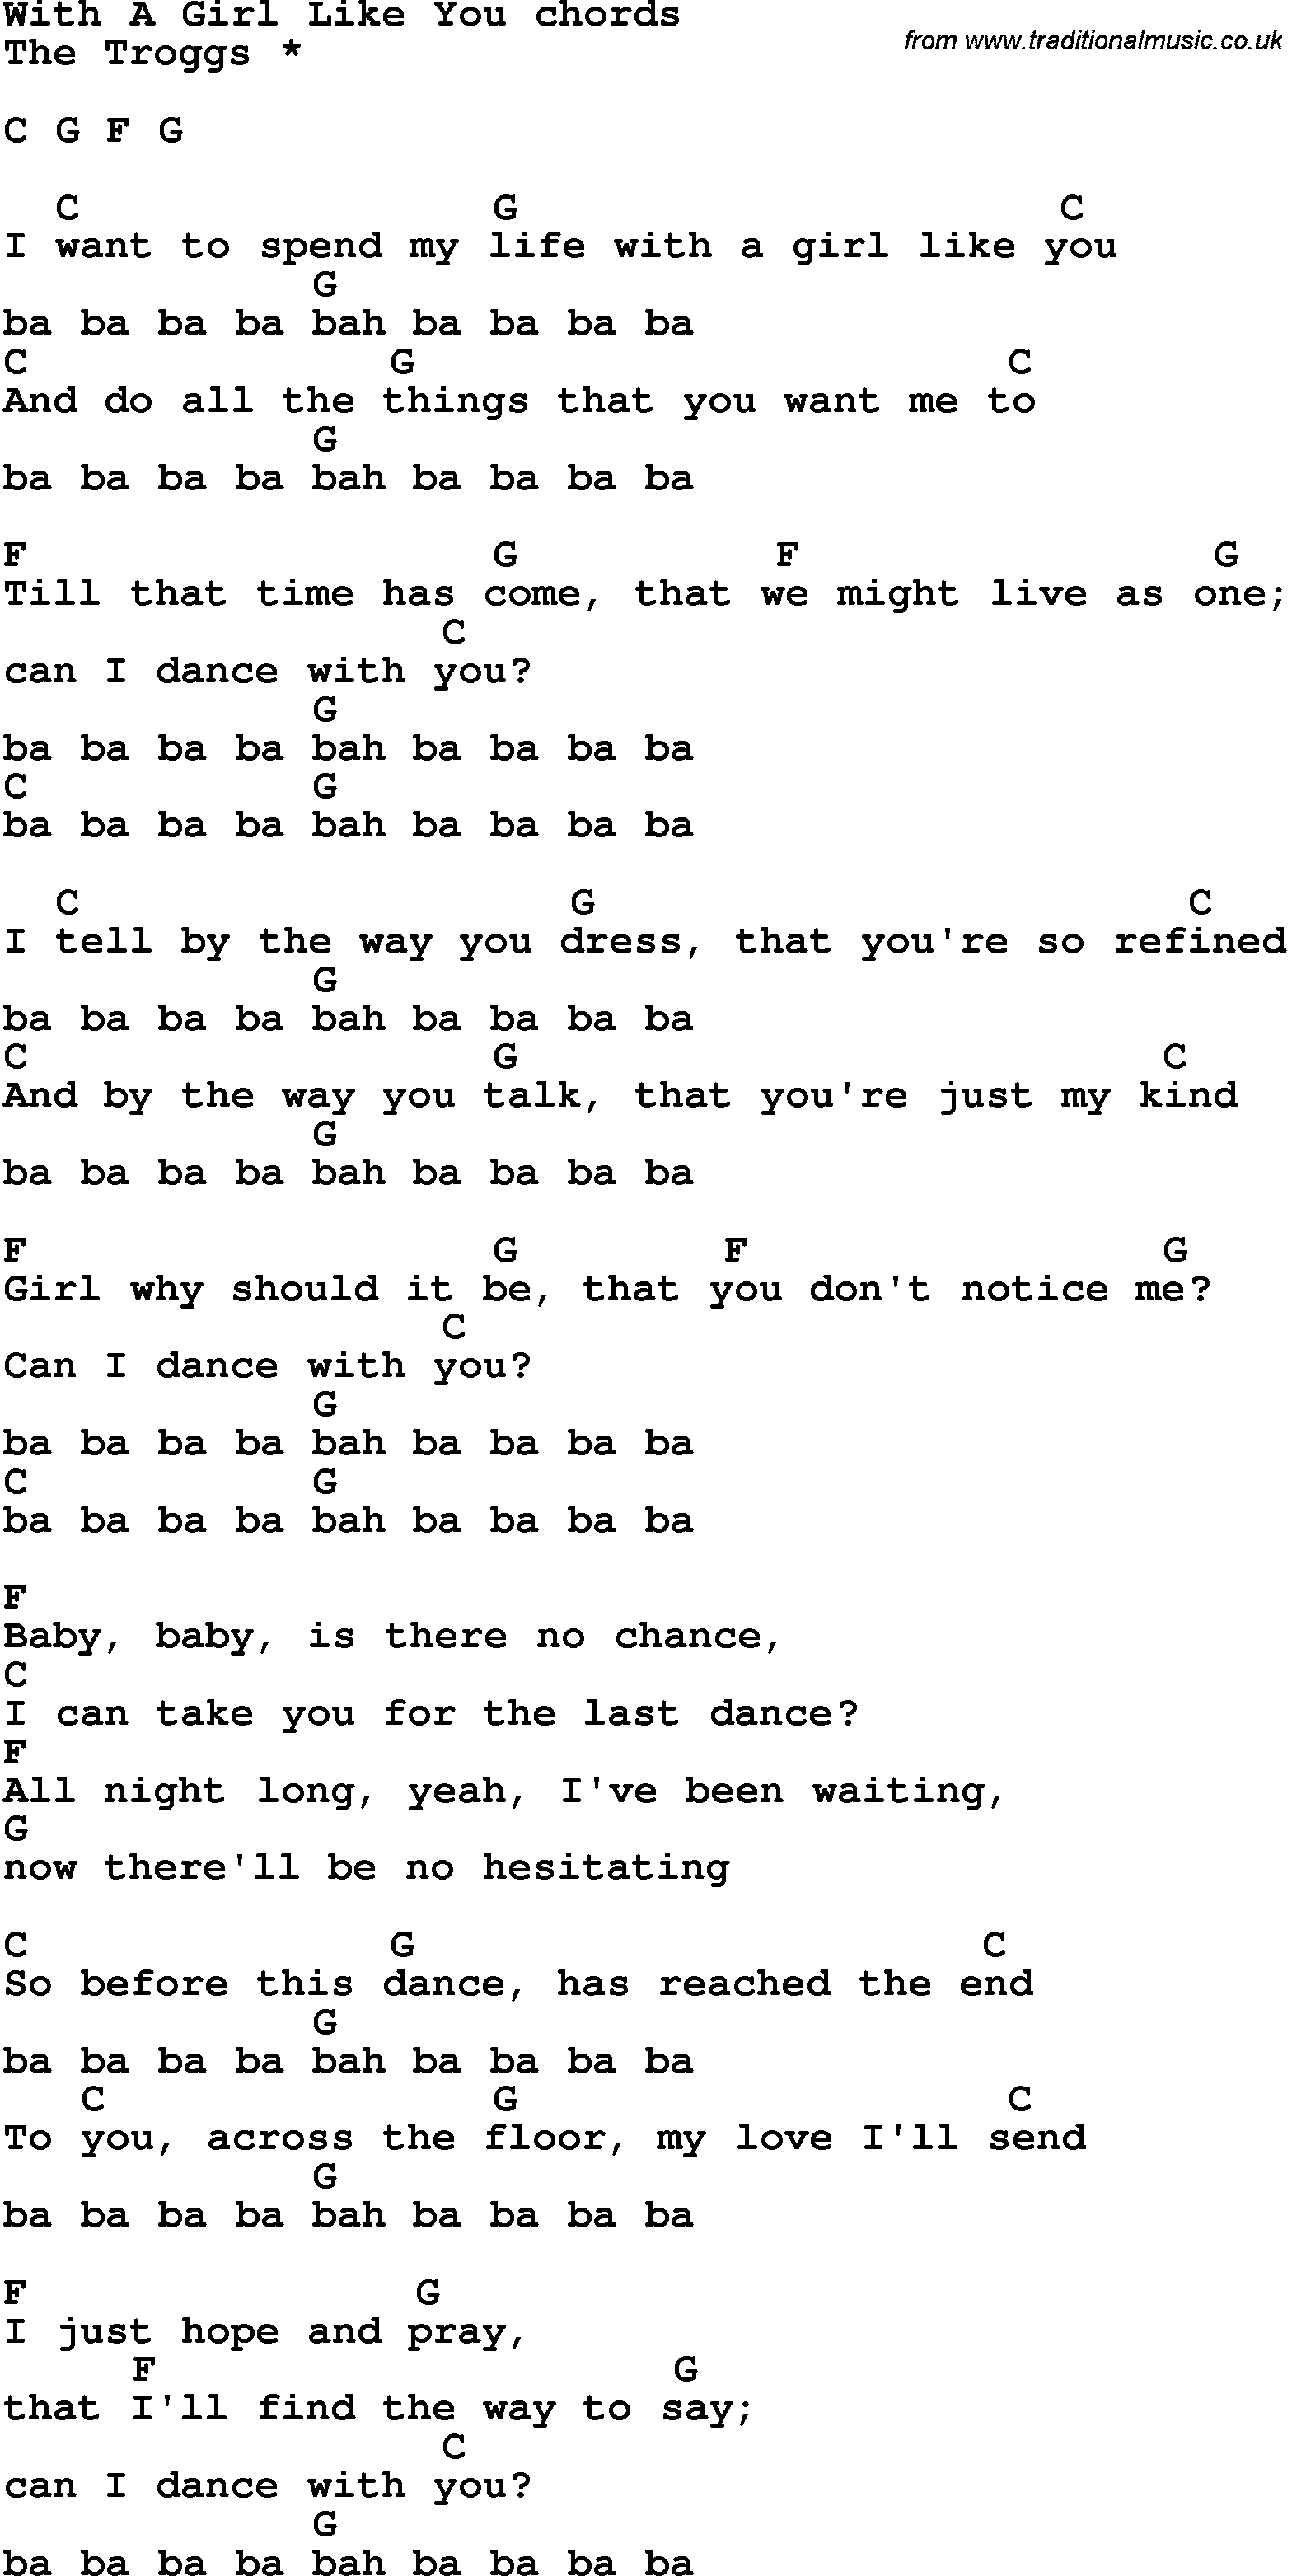 Song Lyrics with guitar chords for With A Girl Like You